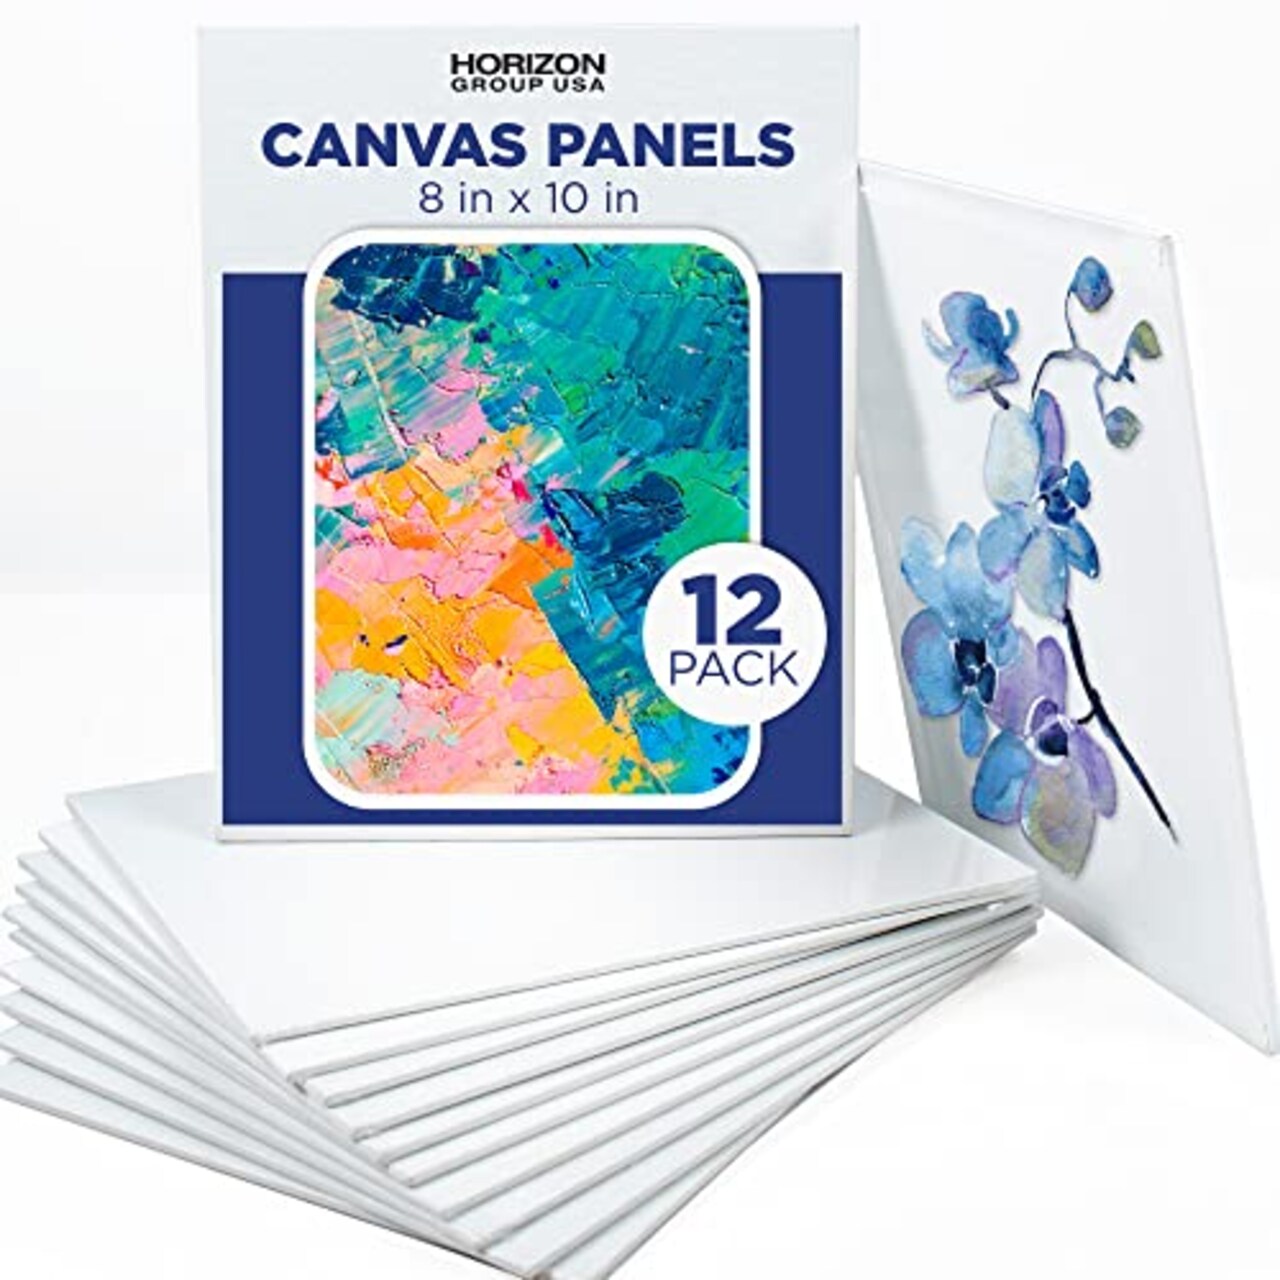 Horizon Group USA 8x10 Canvas Panel Boards Value Pack of 12, Primed,  Perfect for Painting Projects, Watercolor, Oil & Acrylic Paints, Paint  Canvas for Kids, Students, & Professionals